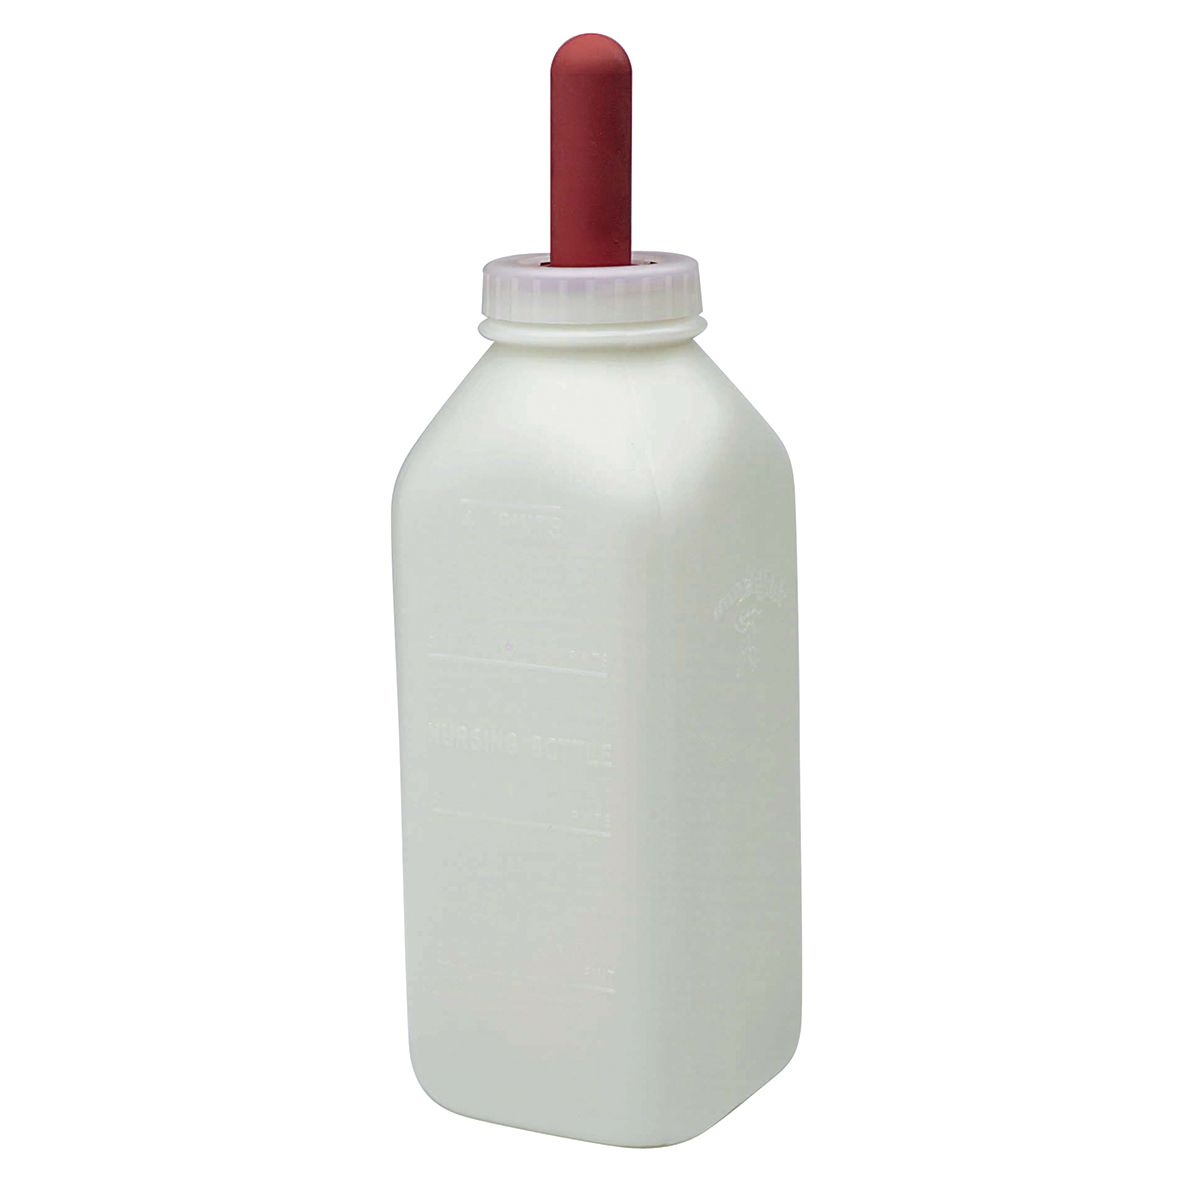 NEW LITTLE GIANT 98CN REPLACEMENT SNAP ON RUBBER CALF MILK BOTTLE NIPPLE 6418859 